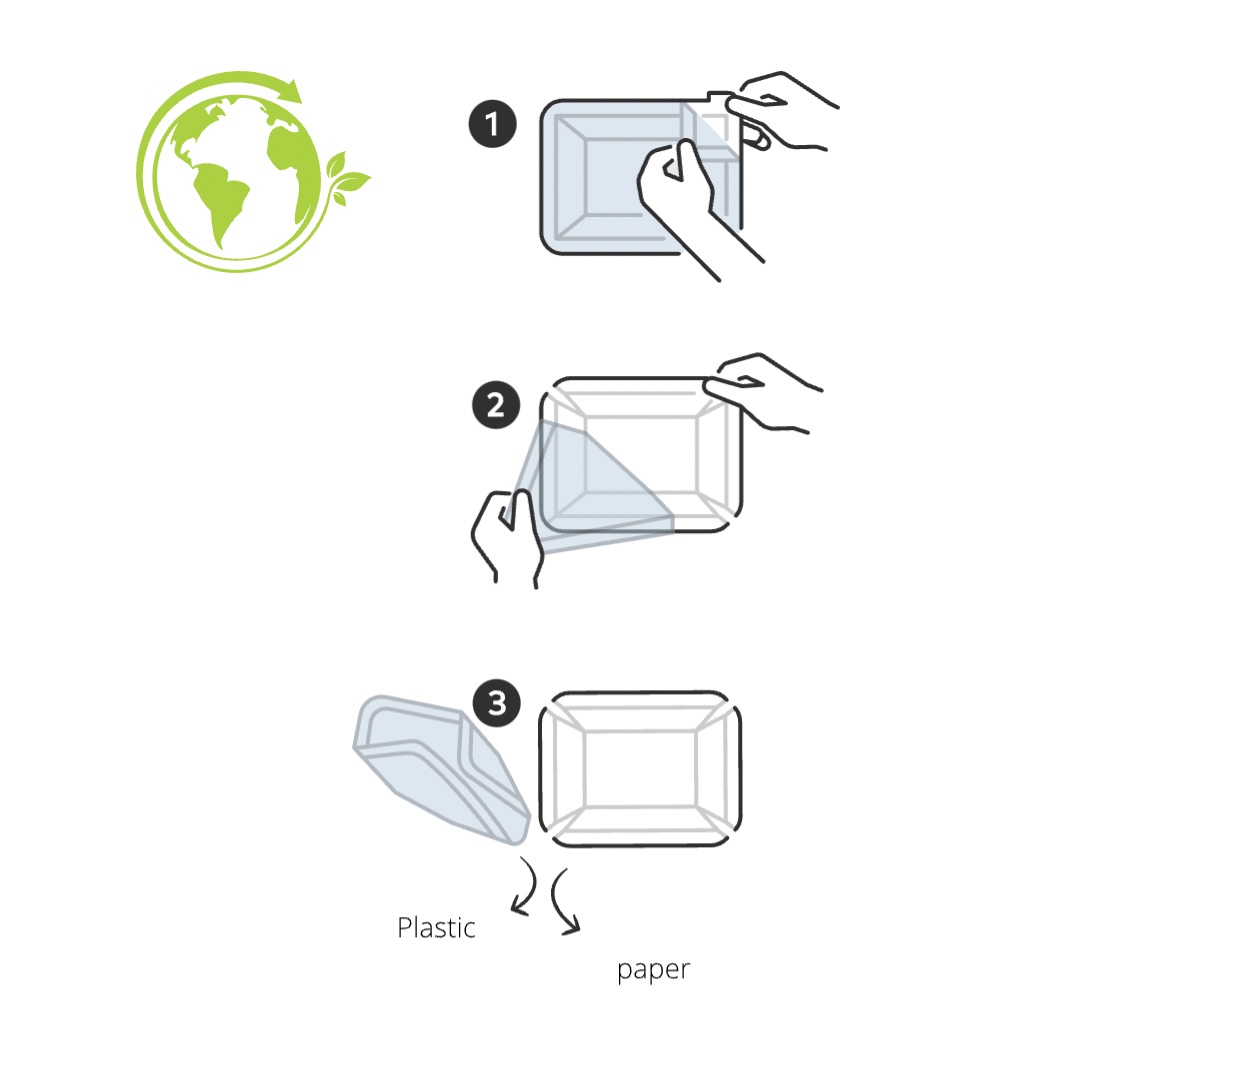 Recycle plastic and cardboard packaging separately